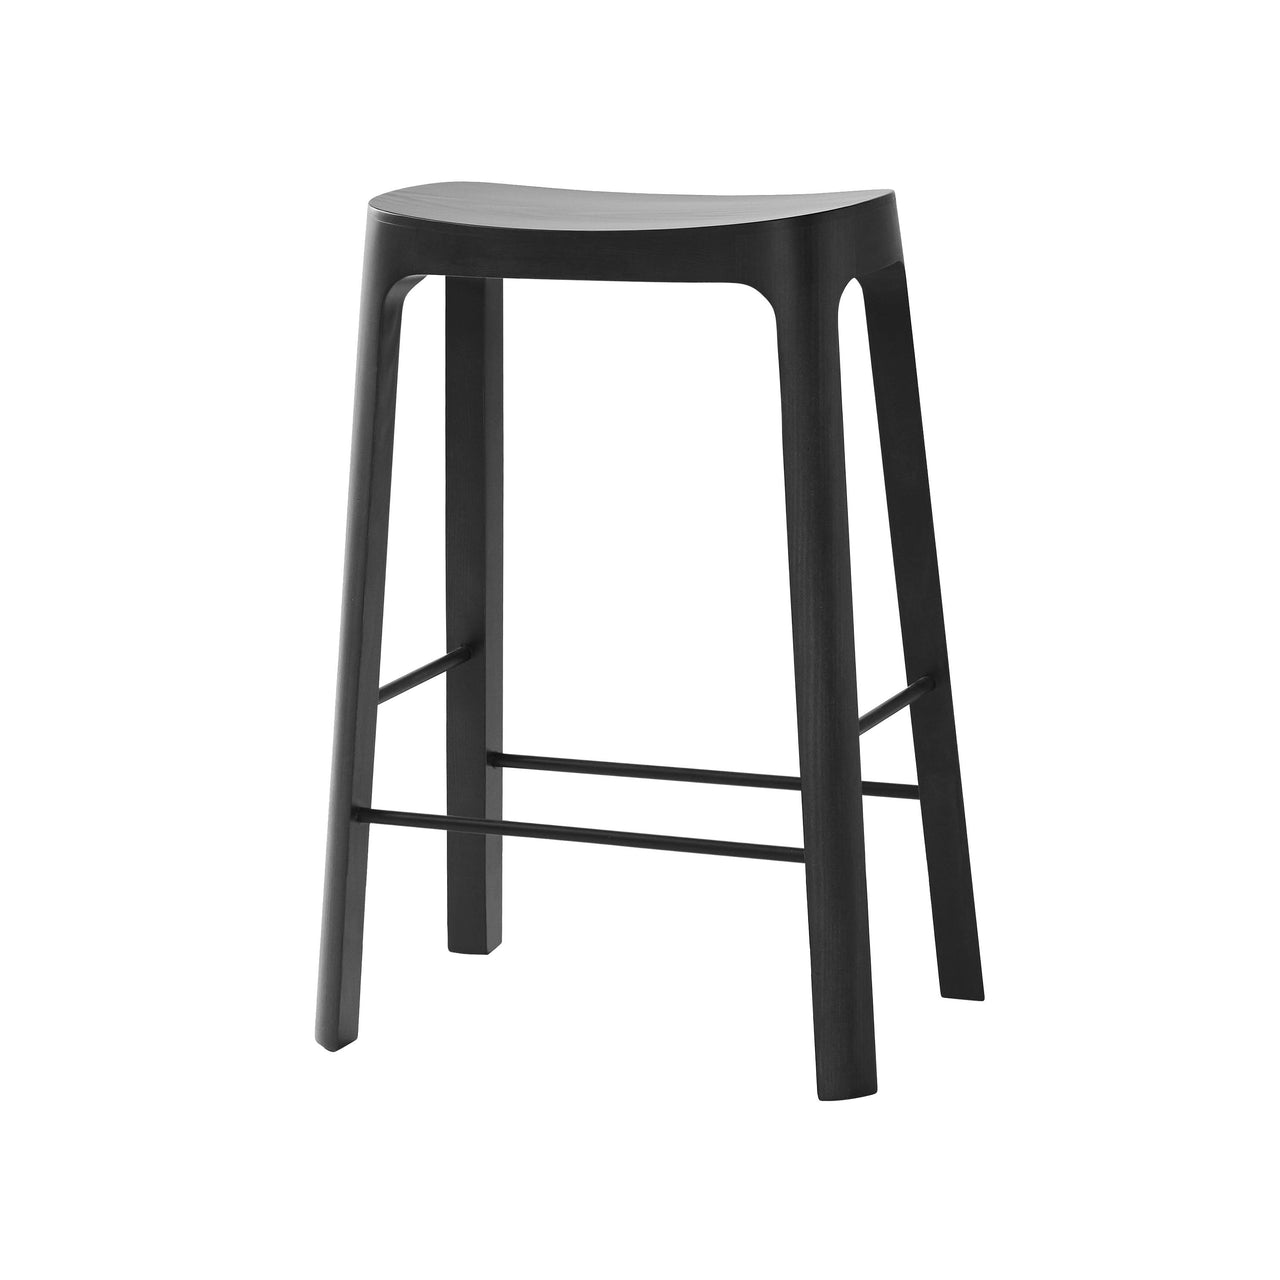 Crofton Bar + Counter Stool: Counter + Stained Black Pine